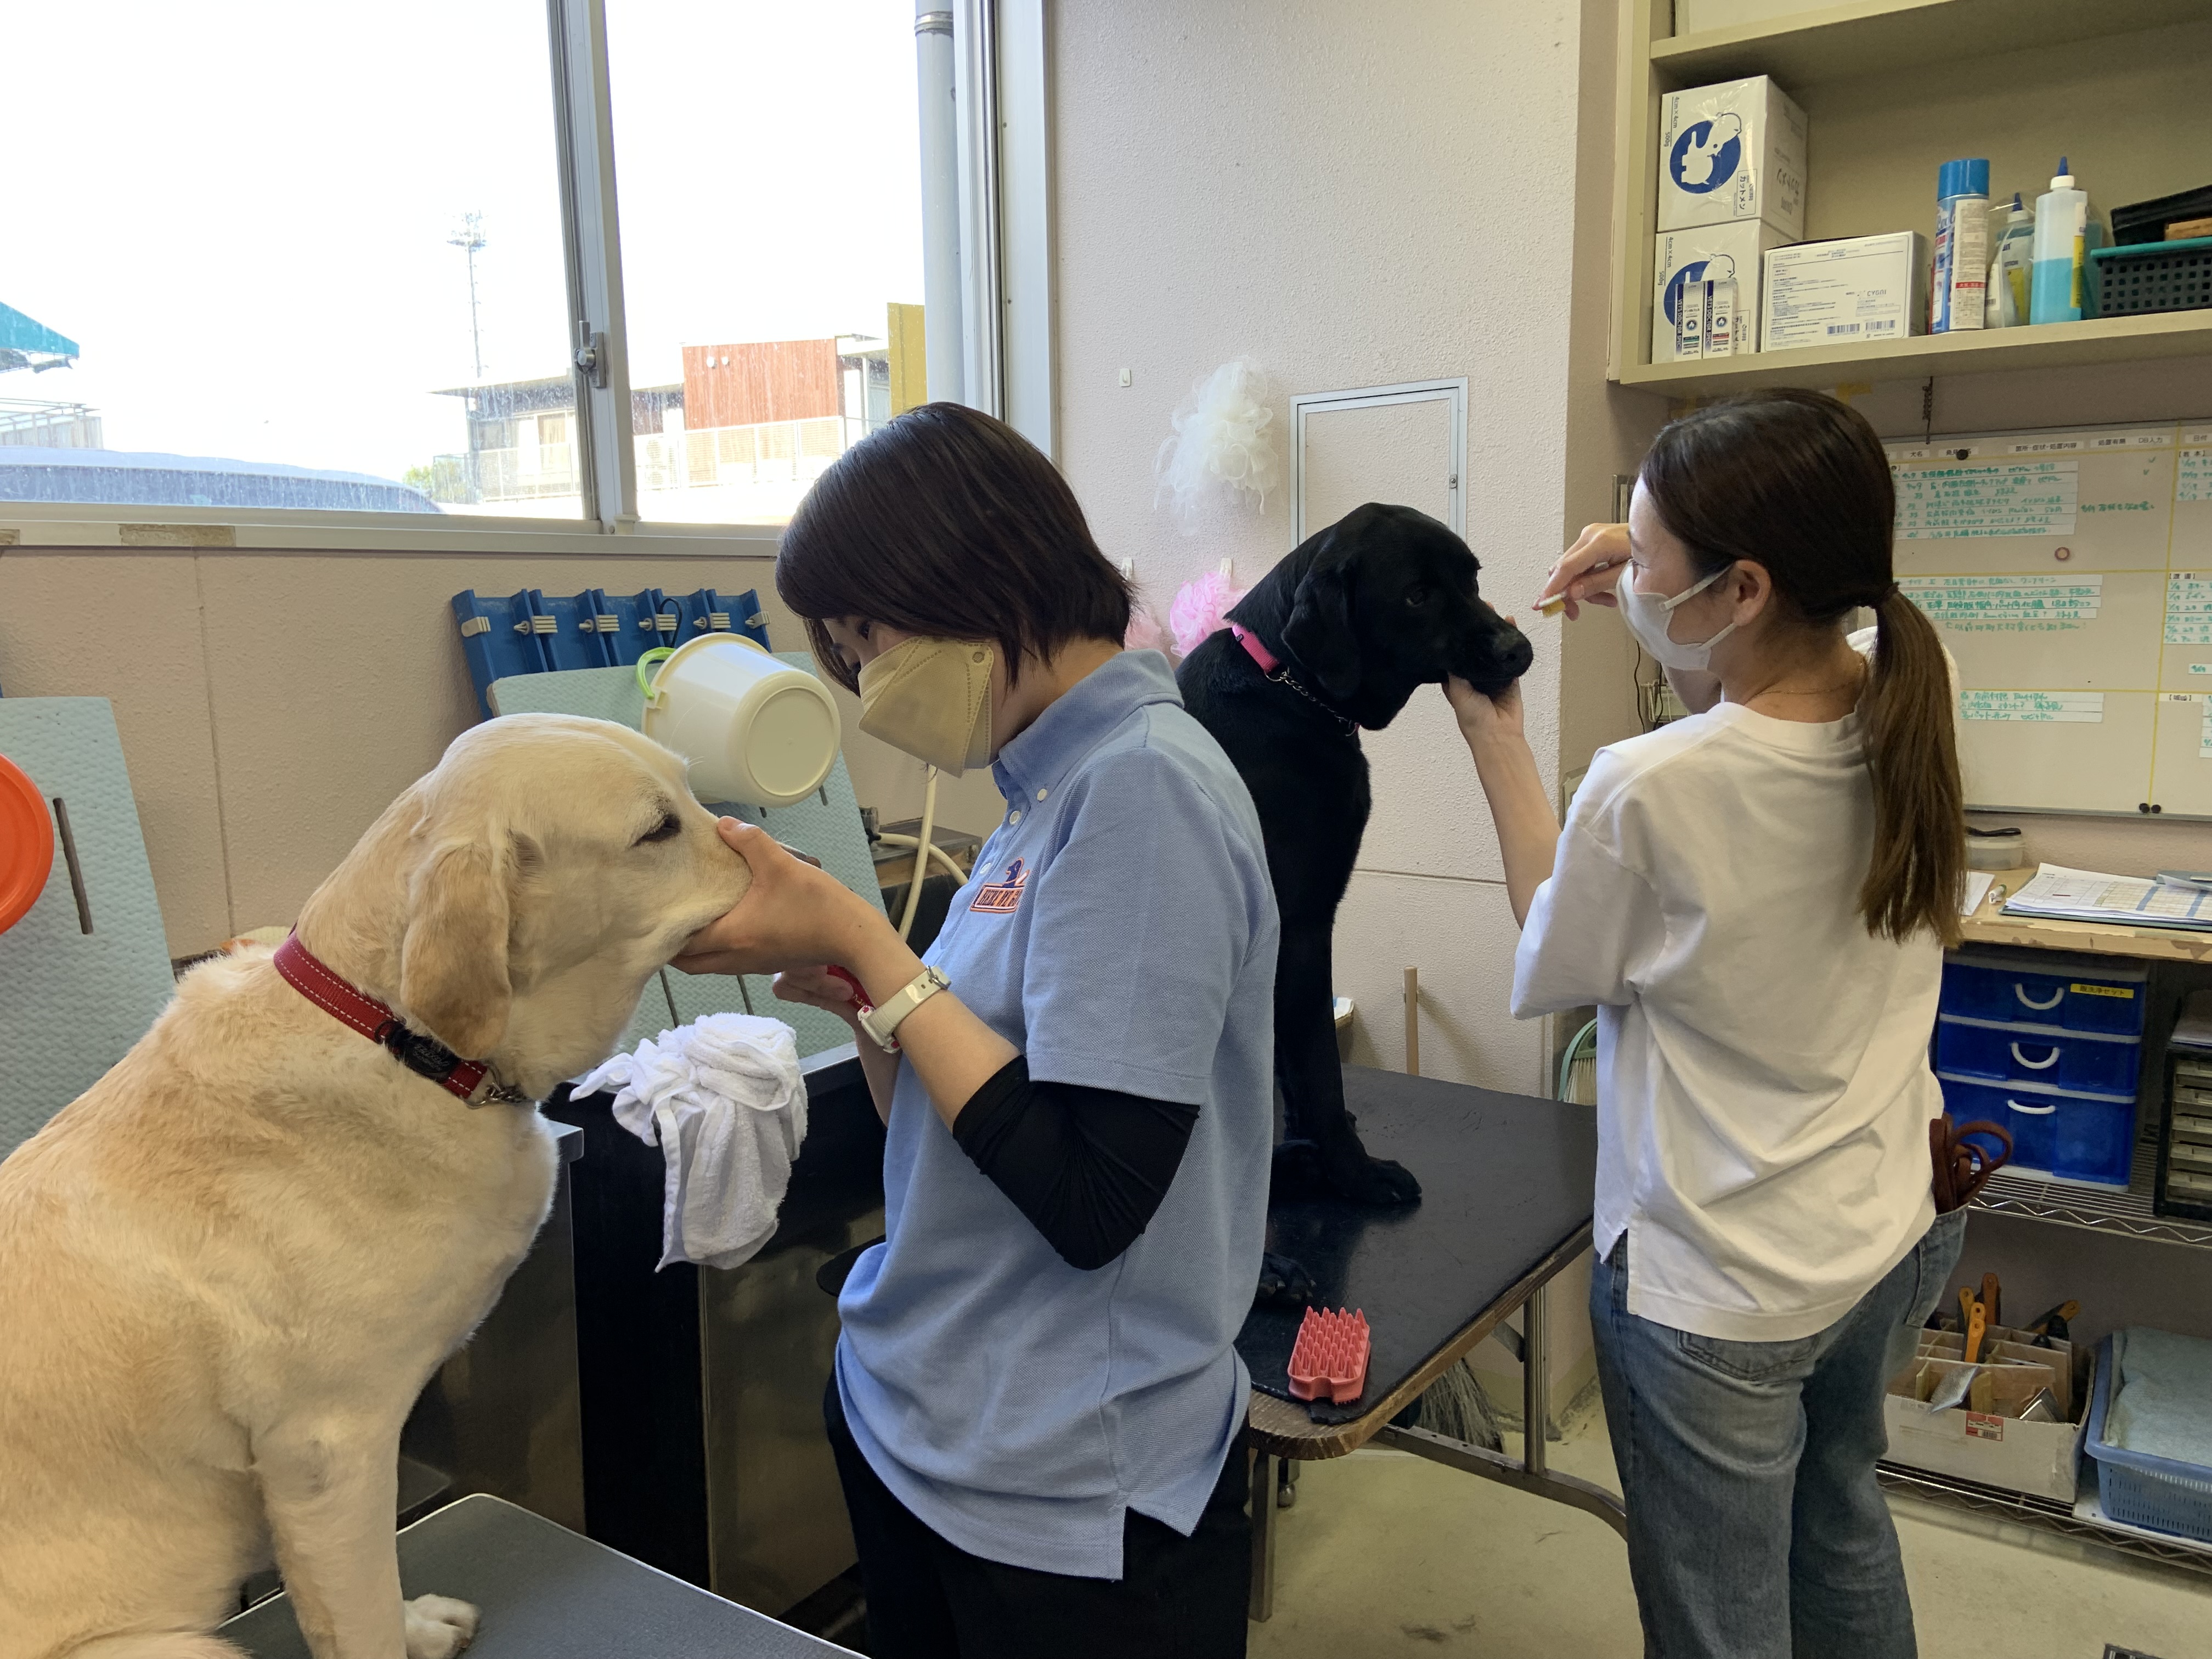 Two new staff facing a yellow and a black Labrador with the dogs' muzzle in their left hand and a toothbrush in their right hand.